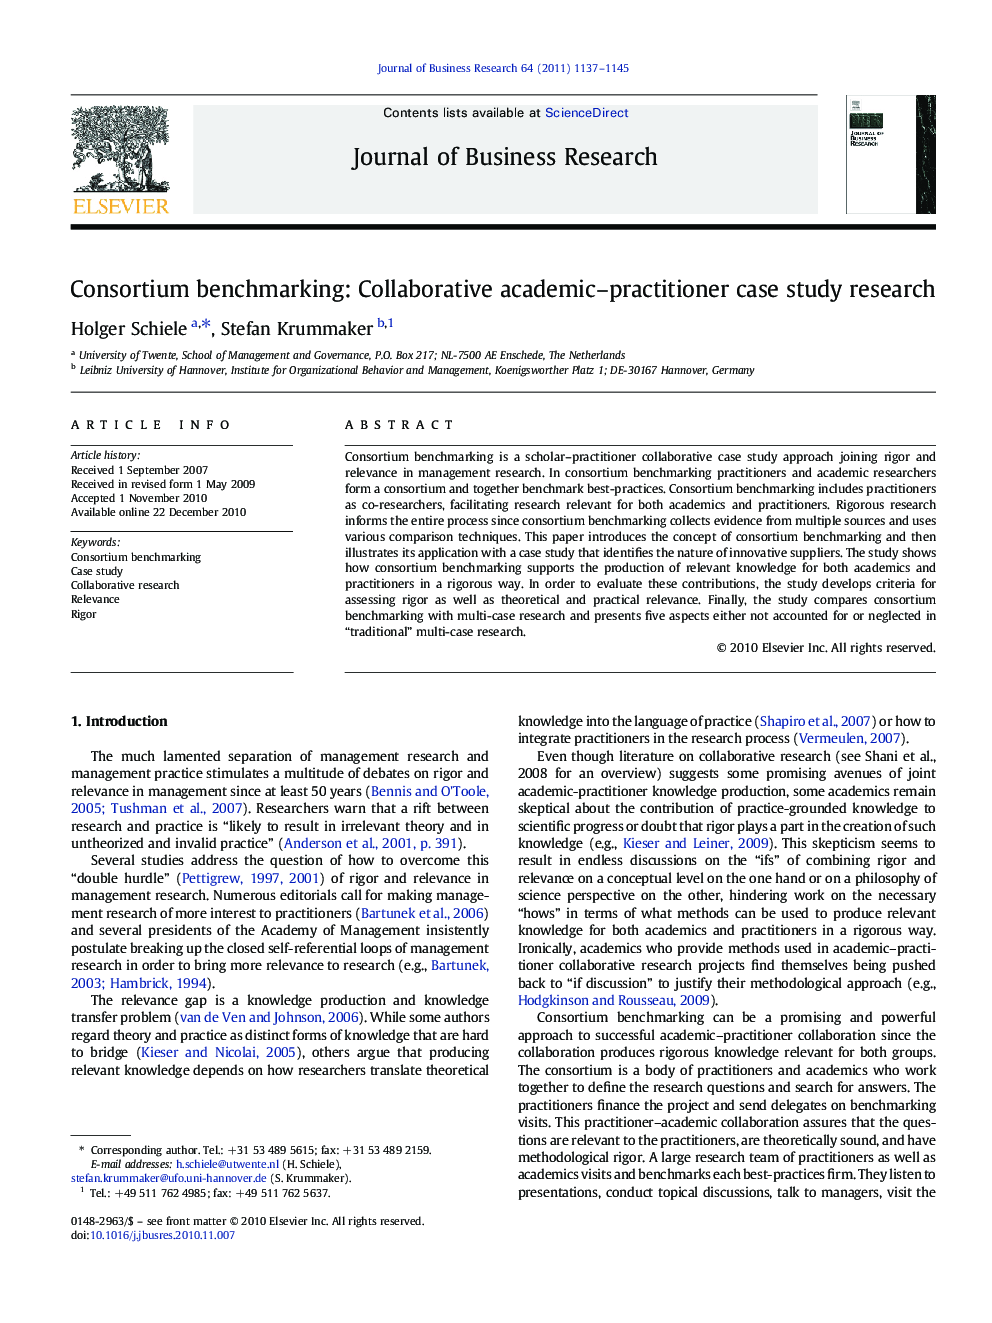 Consortium benchmarking: Collaborative academic–practitioner case study research